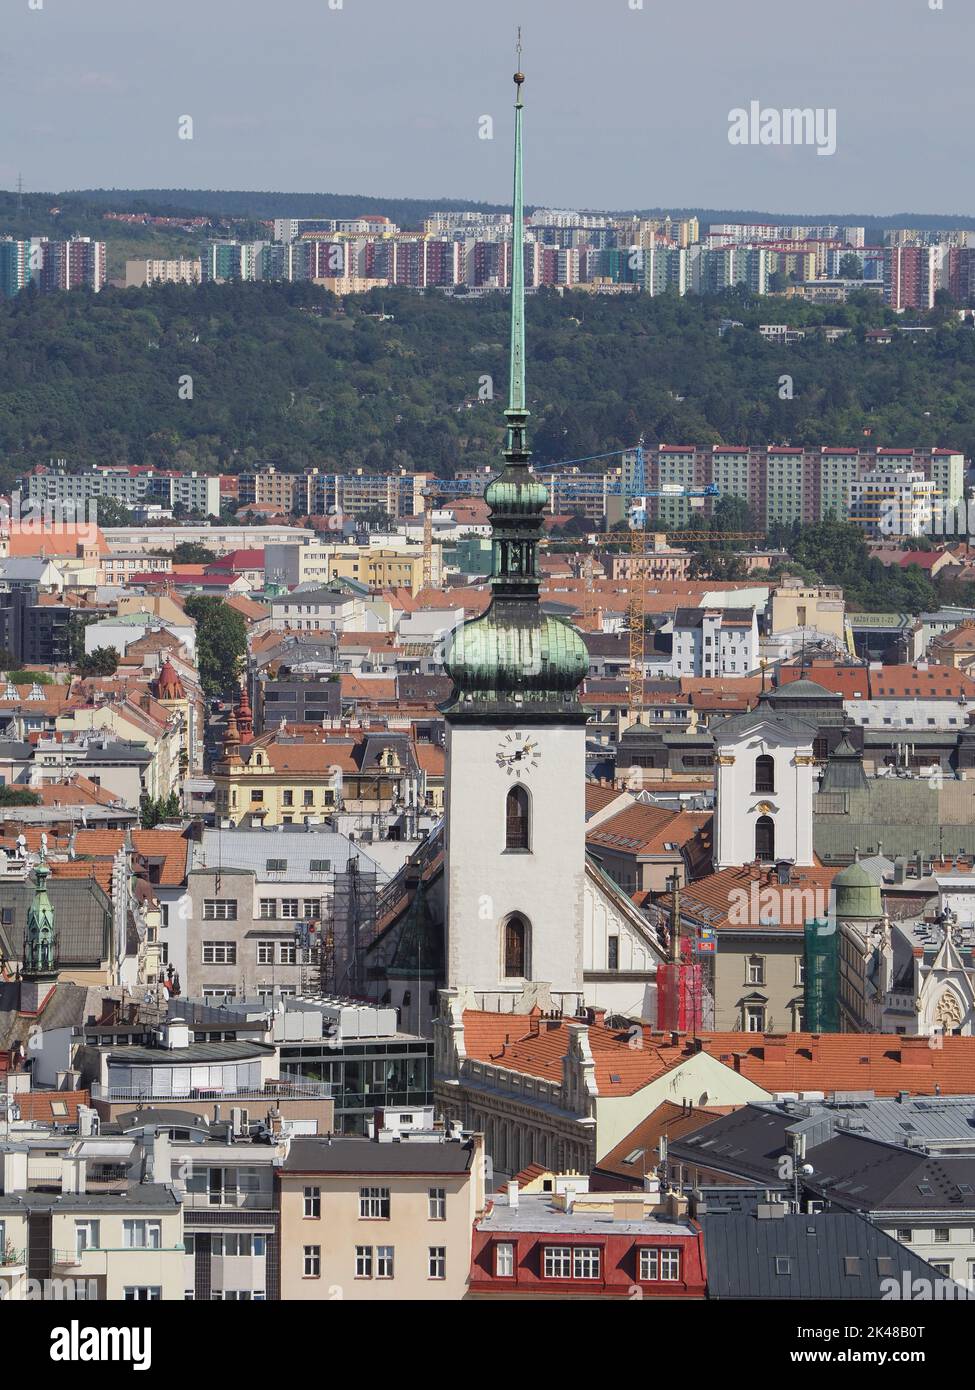 Aerial view of the city in Brno, Czech Republic Stock Photo